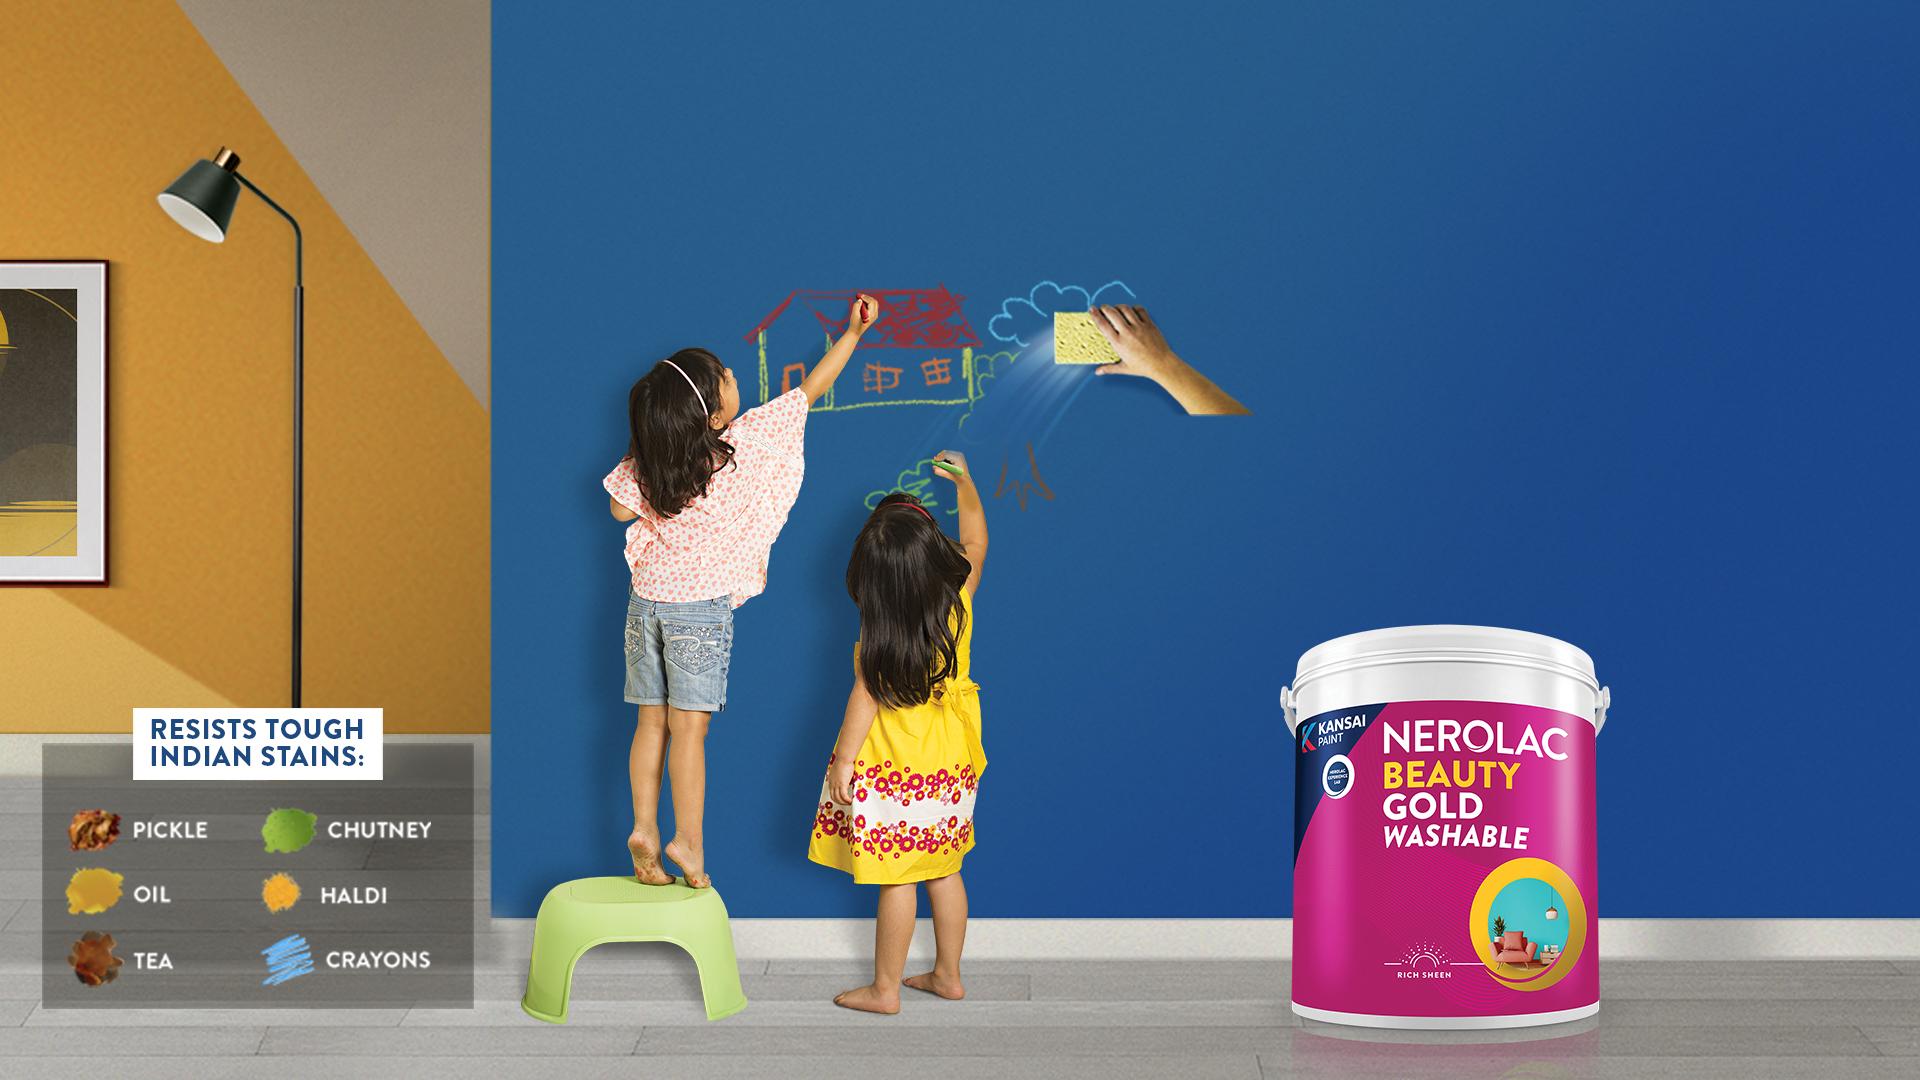 Nerolac Beauty Gold Washable Interior Wall Paint